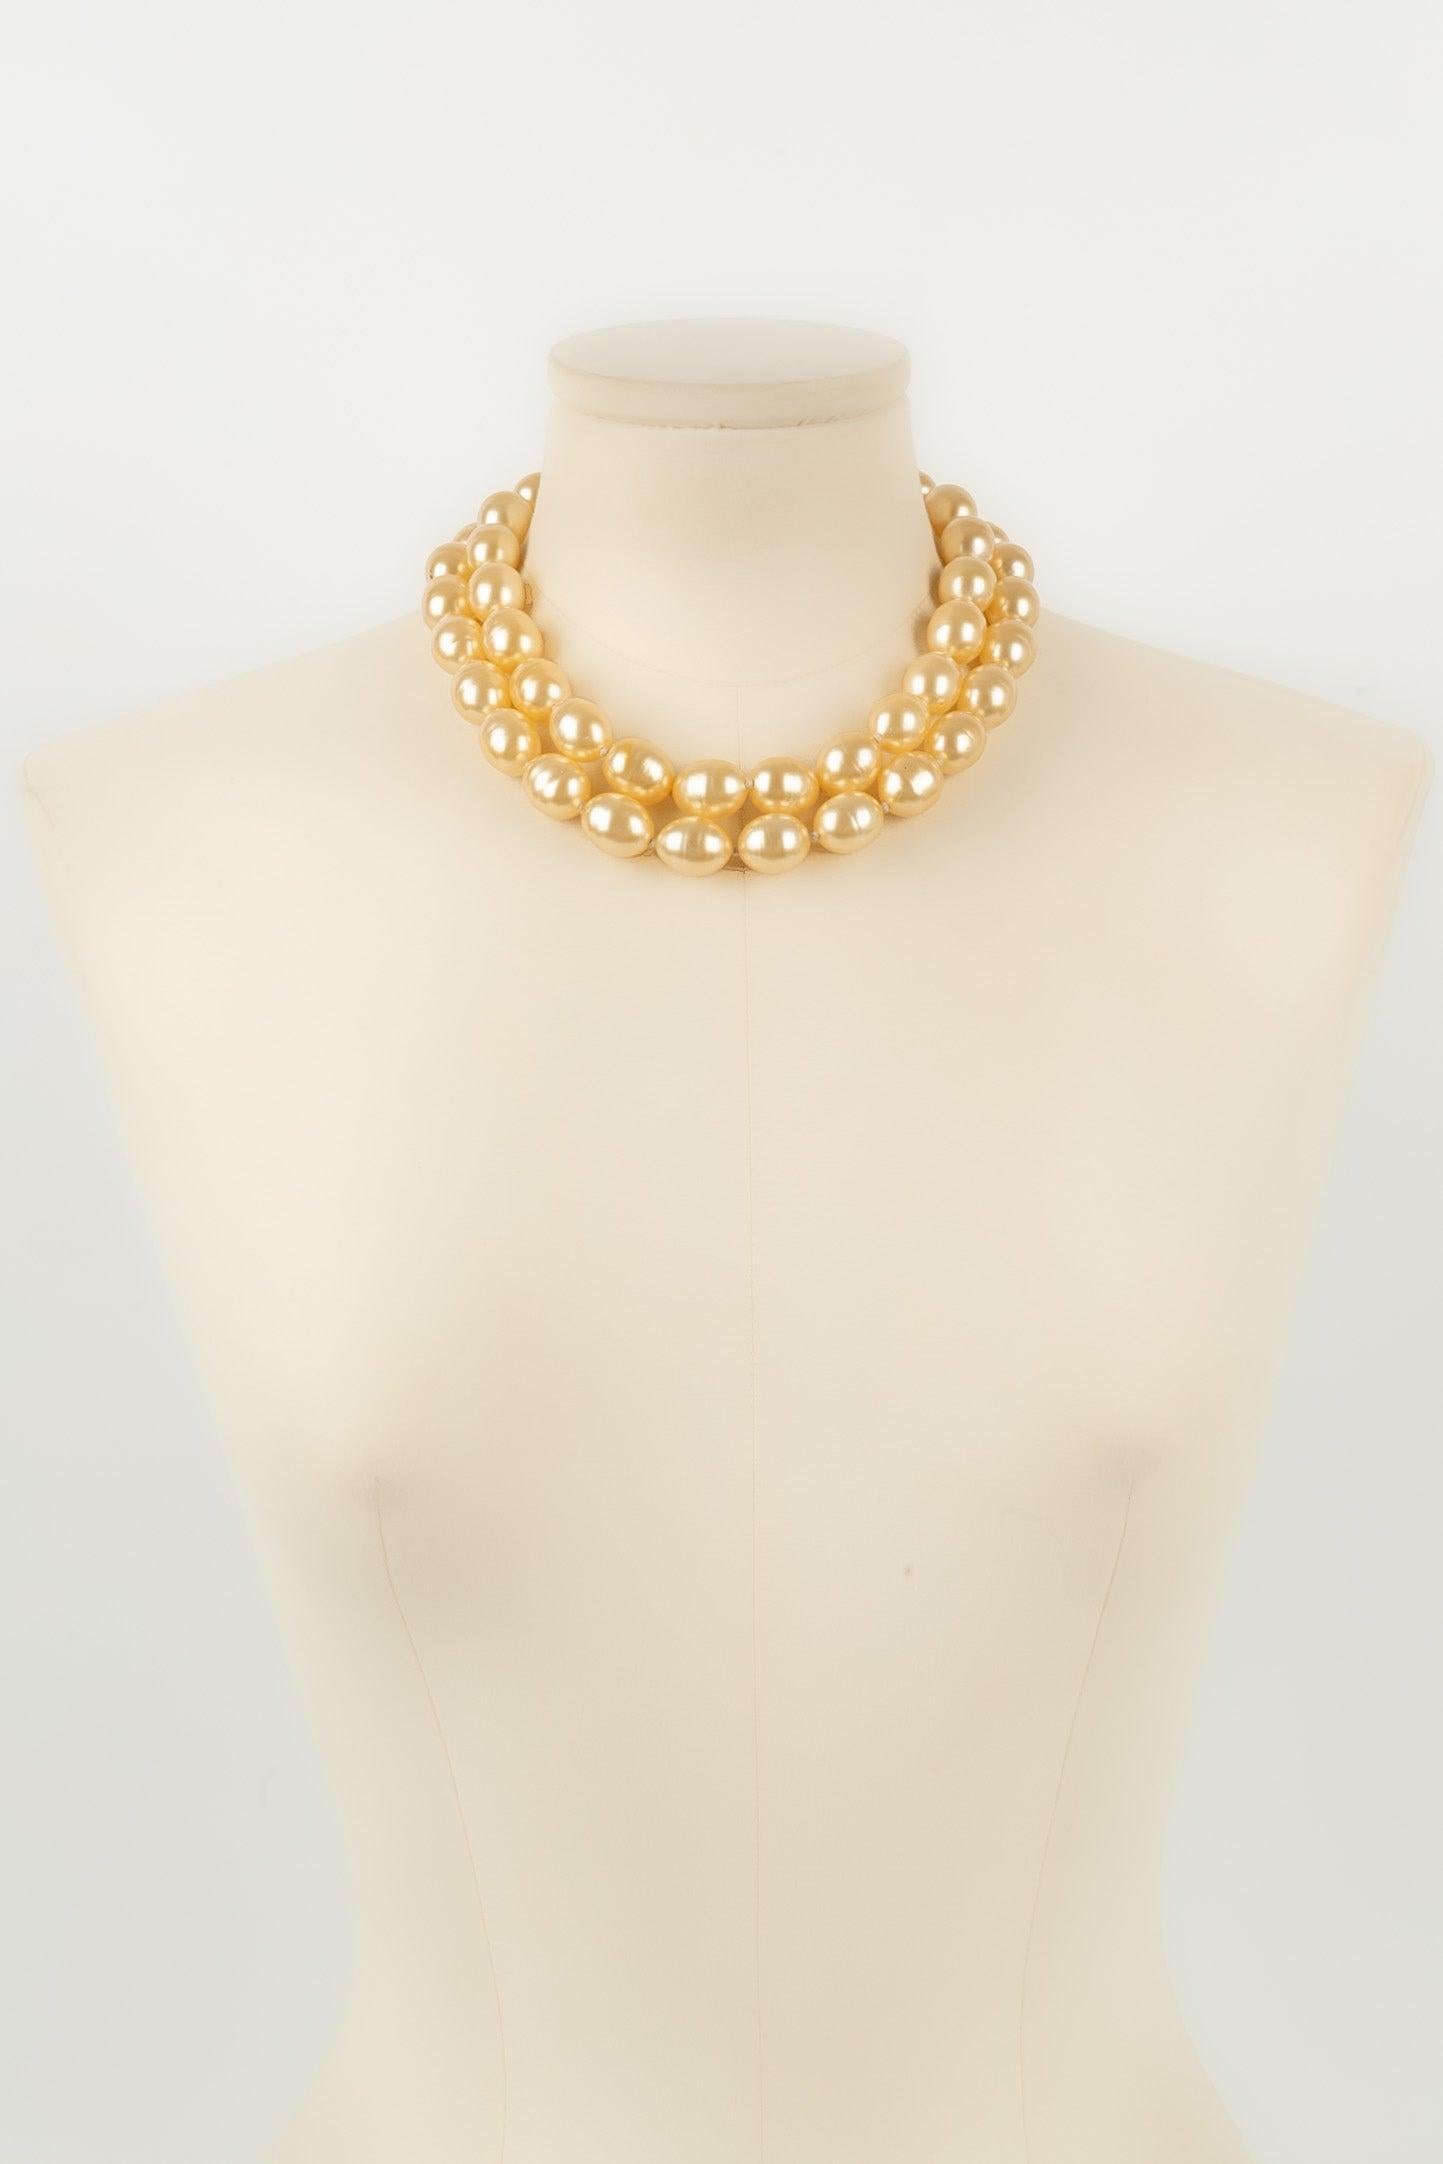 Women's Chanel Short Two-Row Necklace with Pearly Beads For Sale